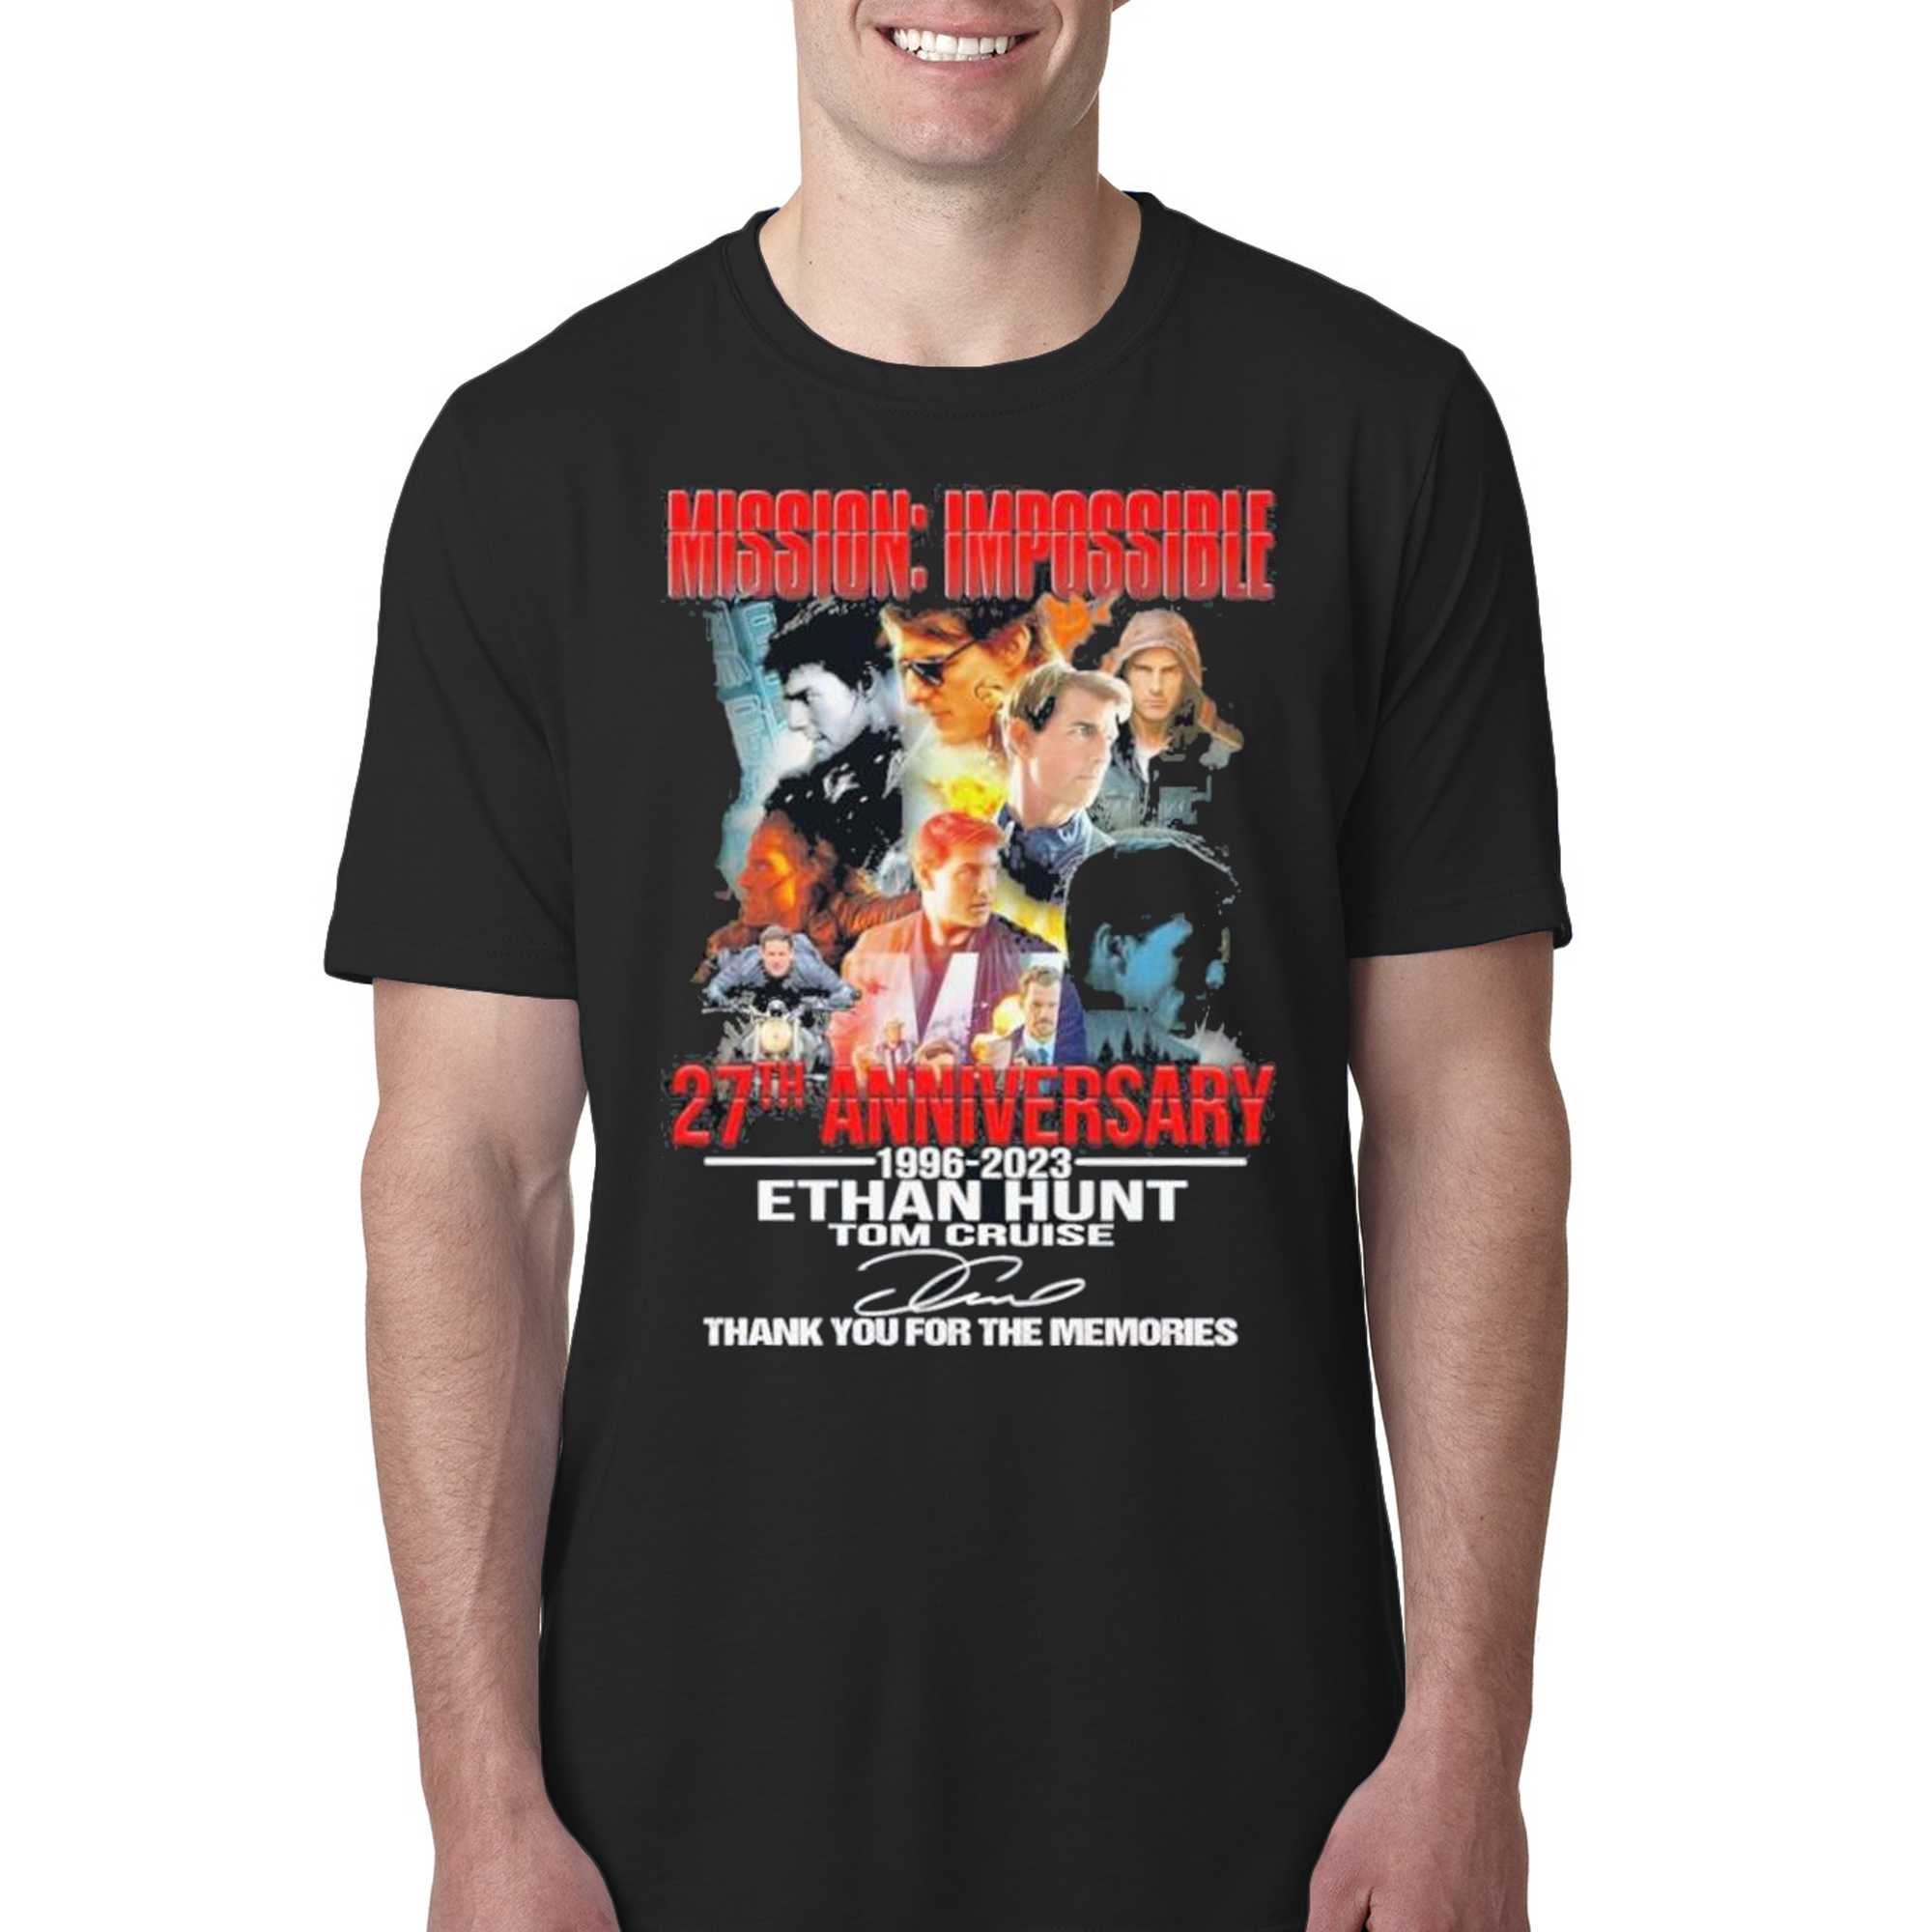 27th 1996 2023 Ethan Hunt Tom Cruise Thank You For The Memories Shirt - Shibtee Clothing